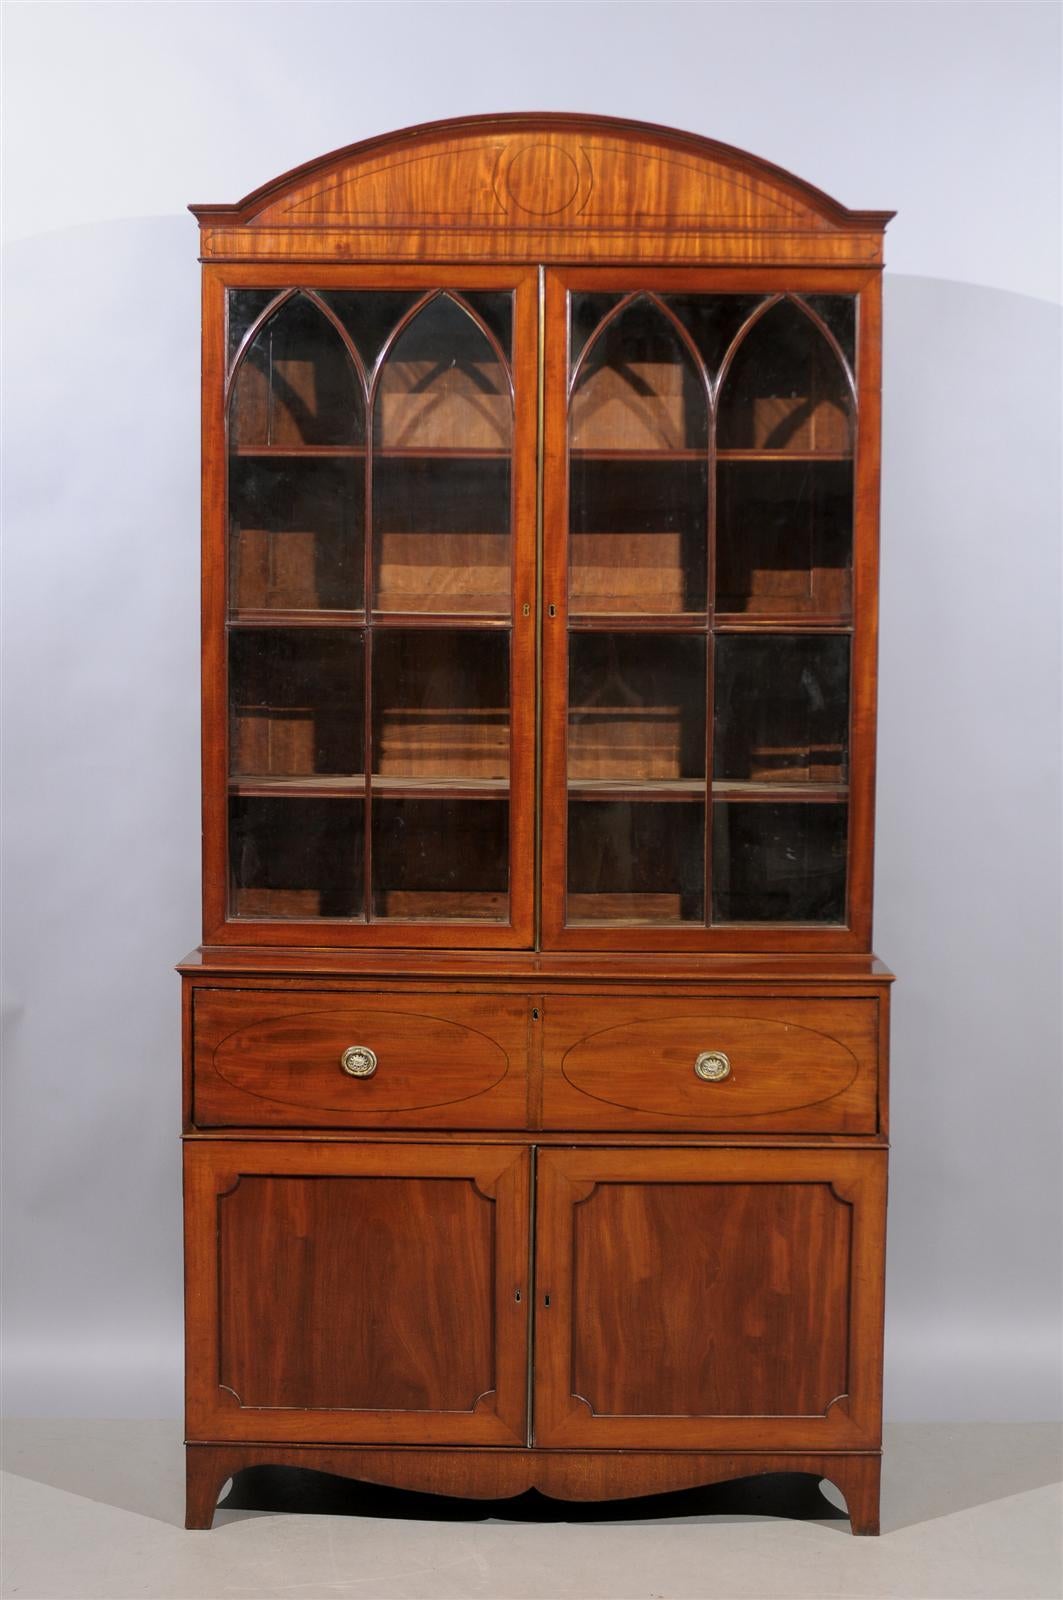 A 19th Century English George III Mahogany Secretary Bookcase with Dome Top, secretary drawer satinwood fitted interior, leather writing surface and cabinet below. 